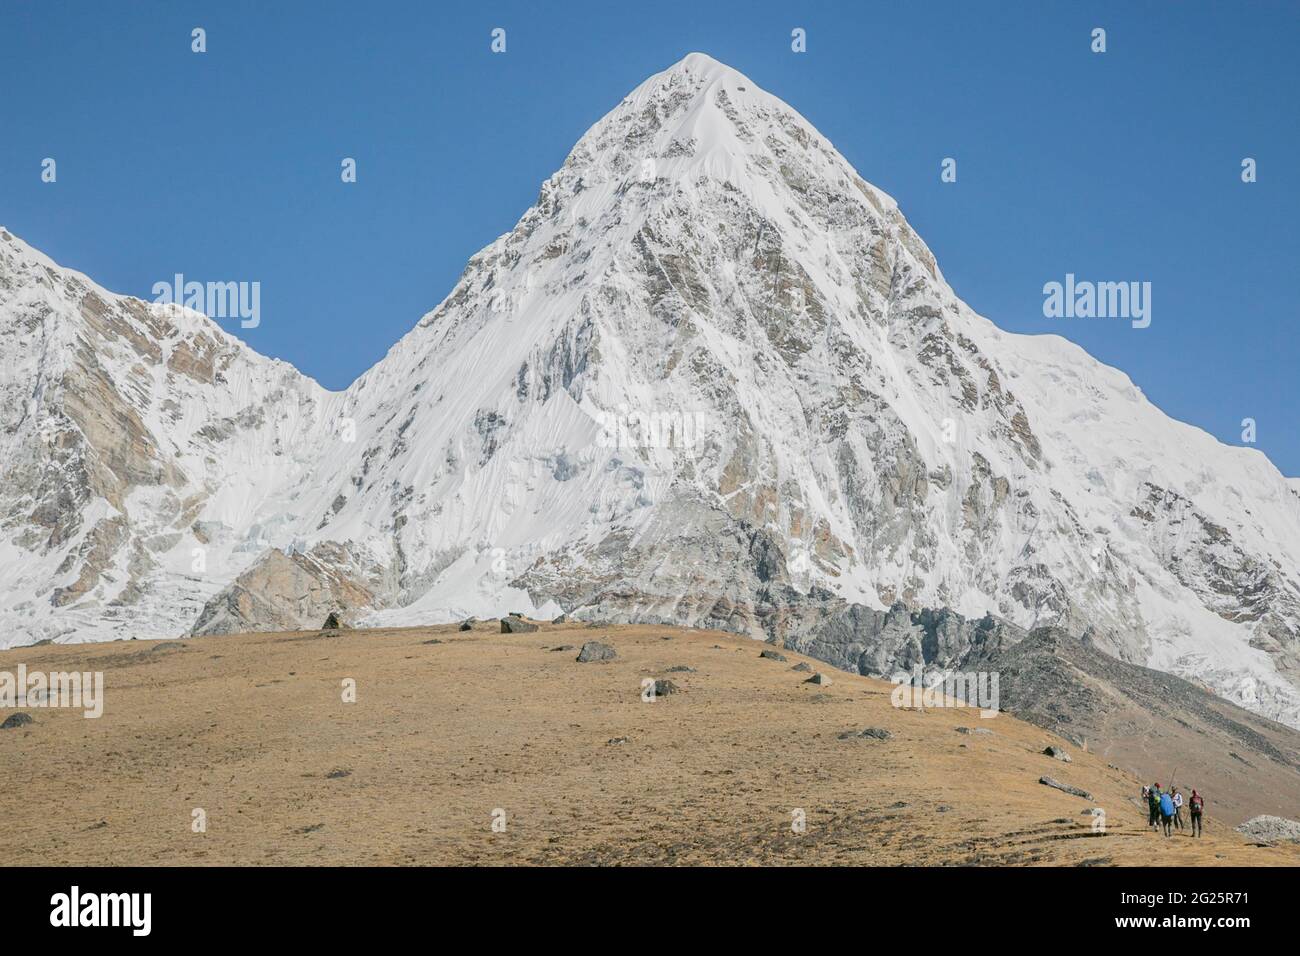 Scale: Pumori and a climbing team headed towards Everest Basecamp Stock Photo